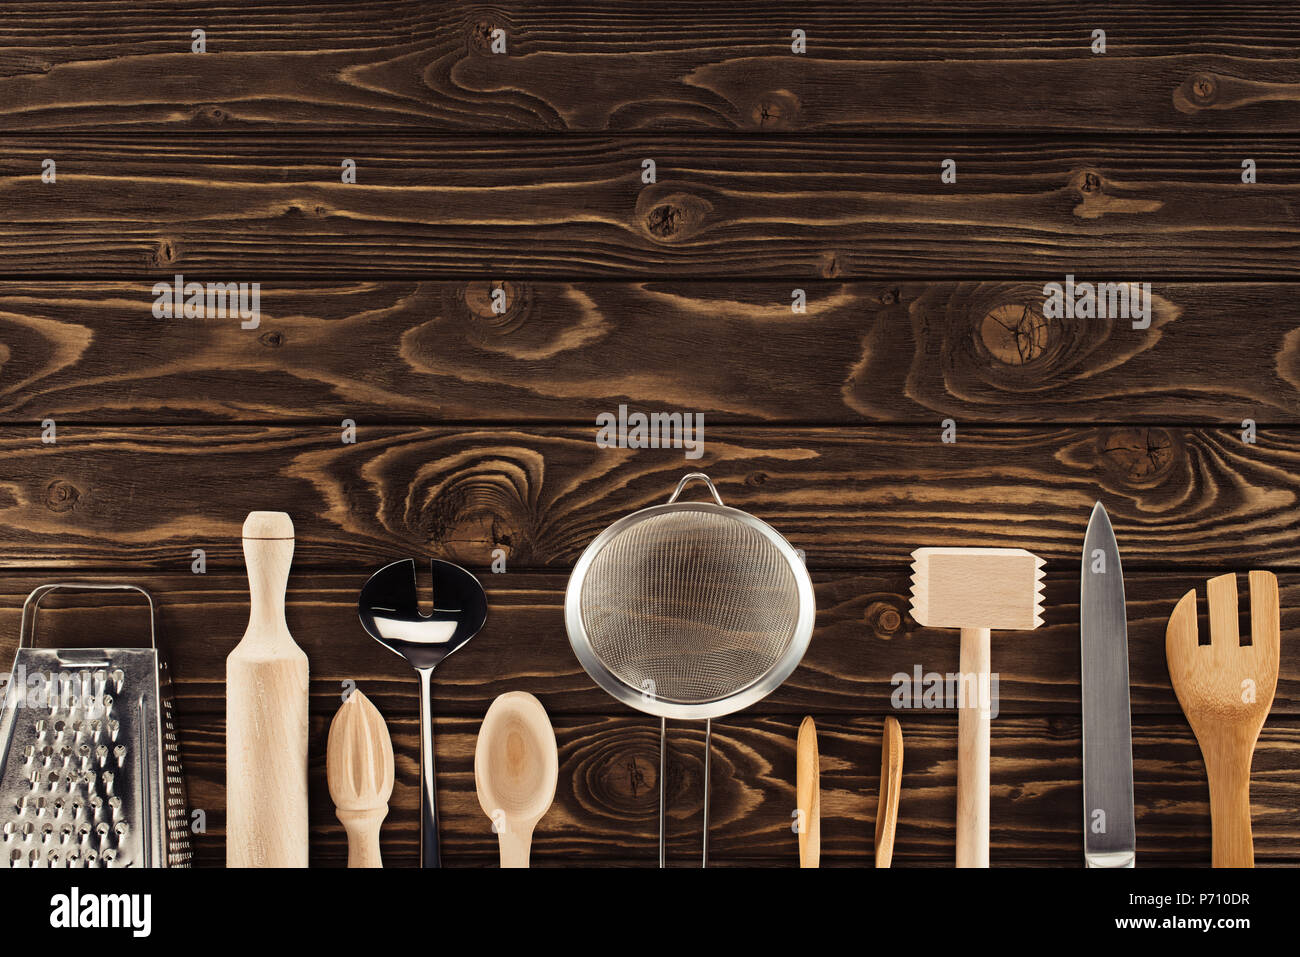 elevated view of kitchen utensils placed in row on wooden table Stock Photo